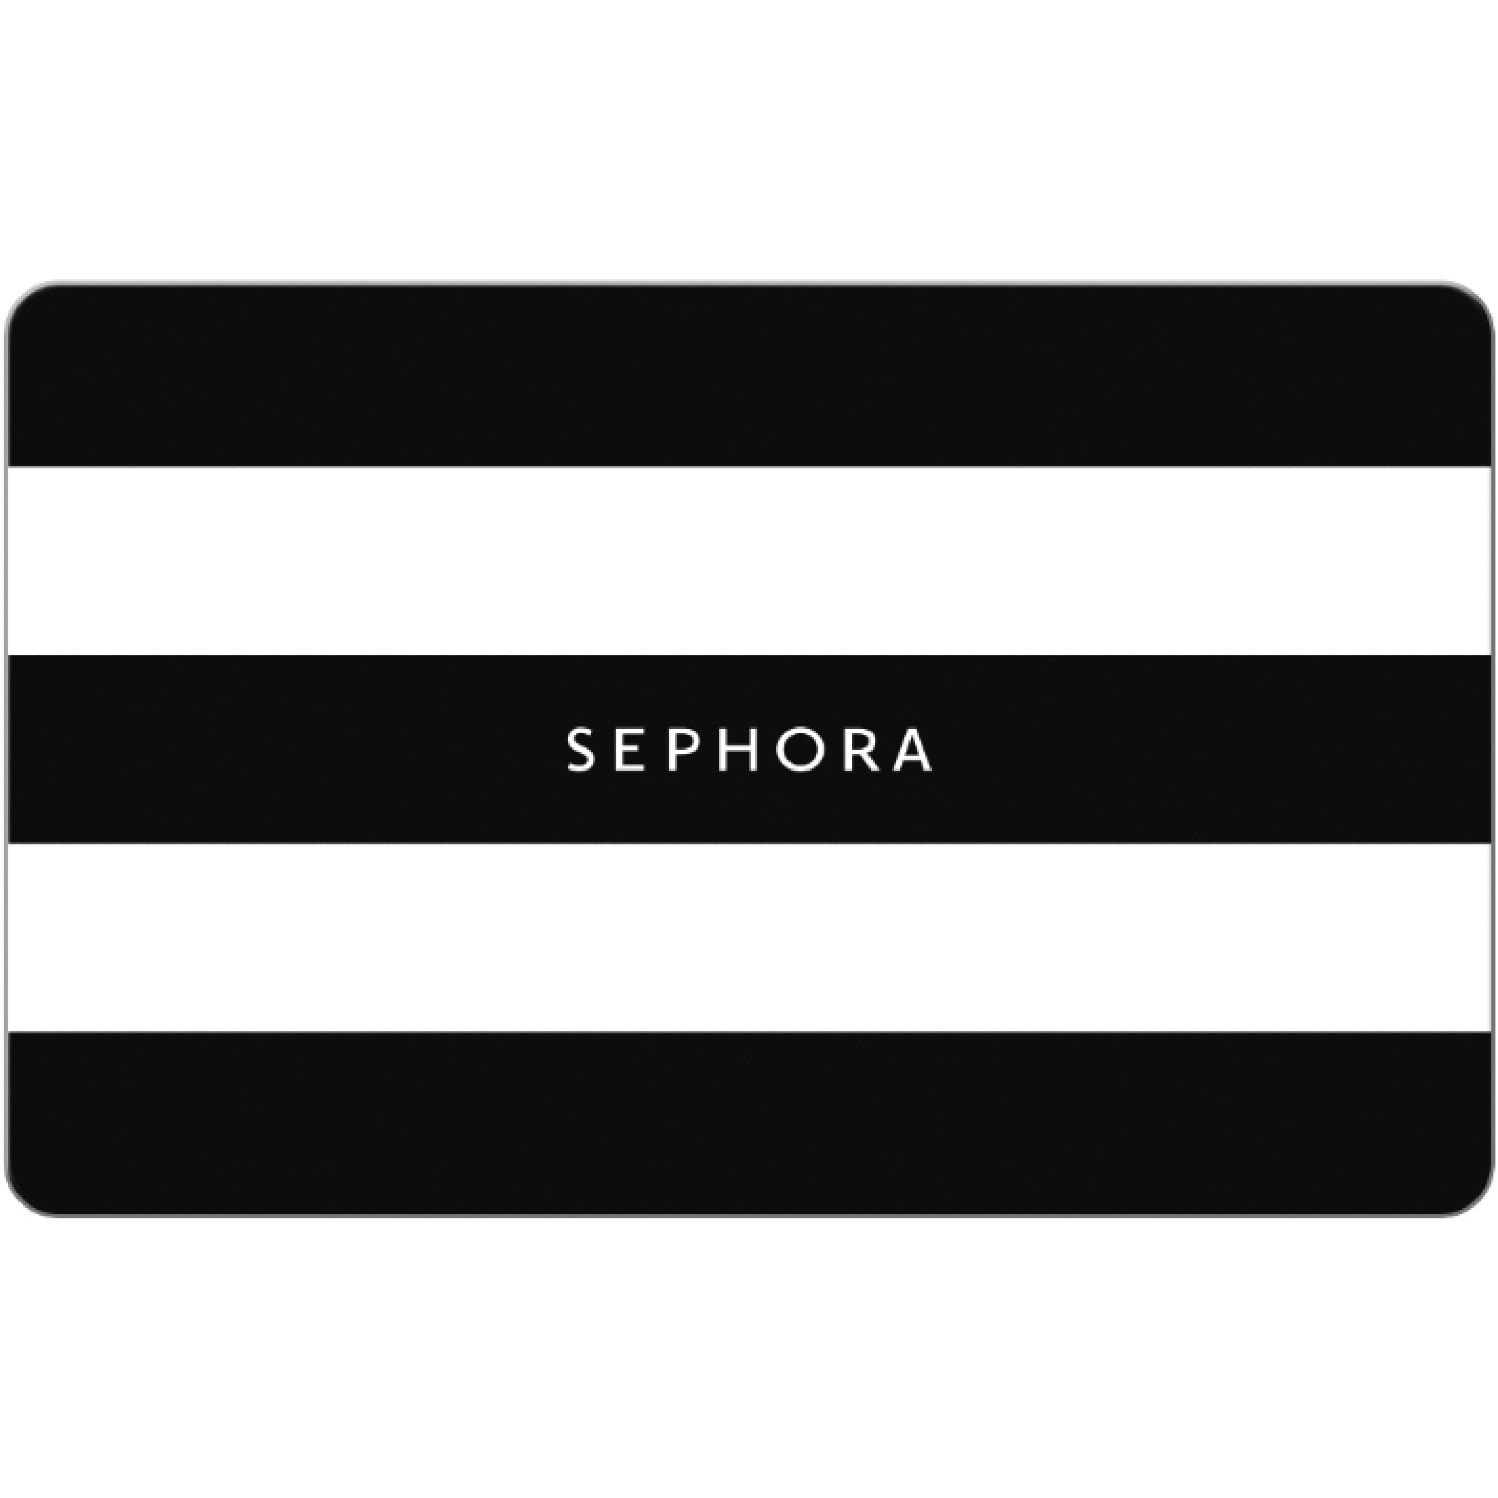 Sephora $50 eGift Card (Email Delivery) 